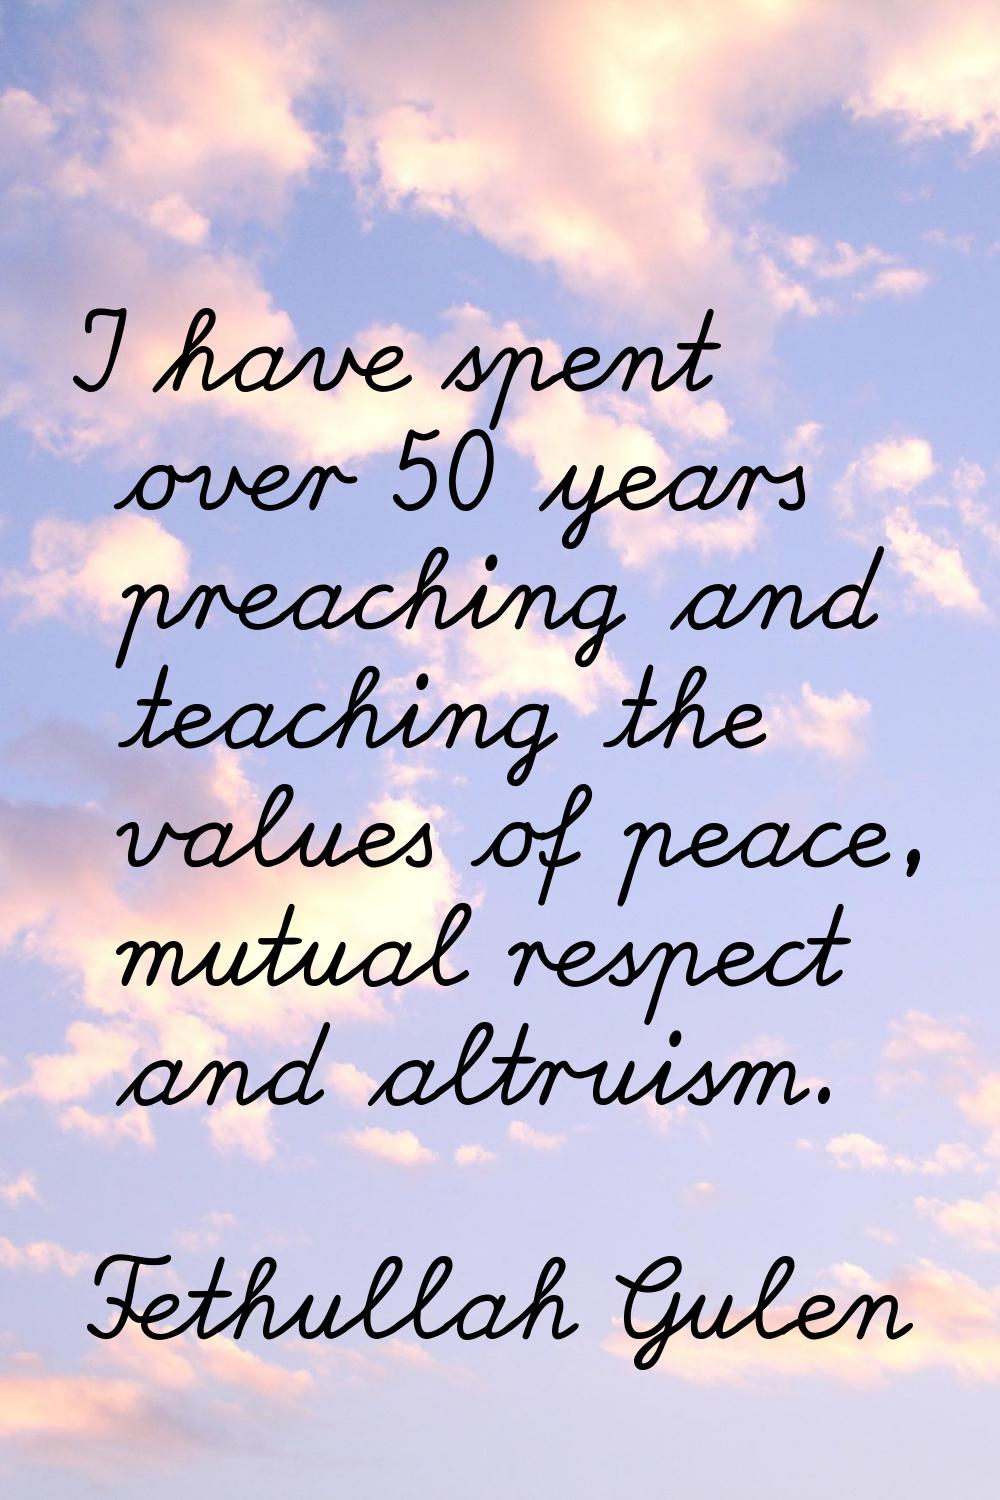 I have spent over 50 years preaching and teaching the values of peace, mutual respect and altruism.